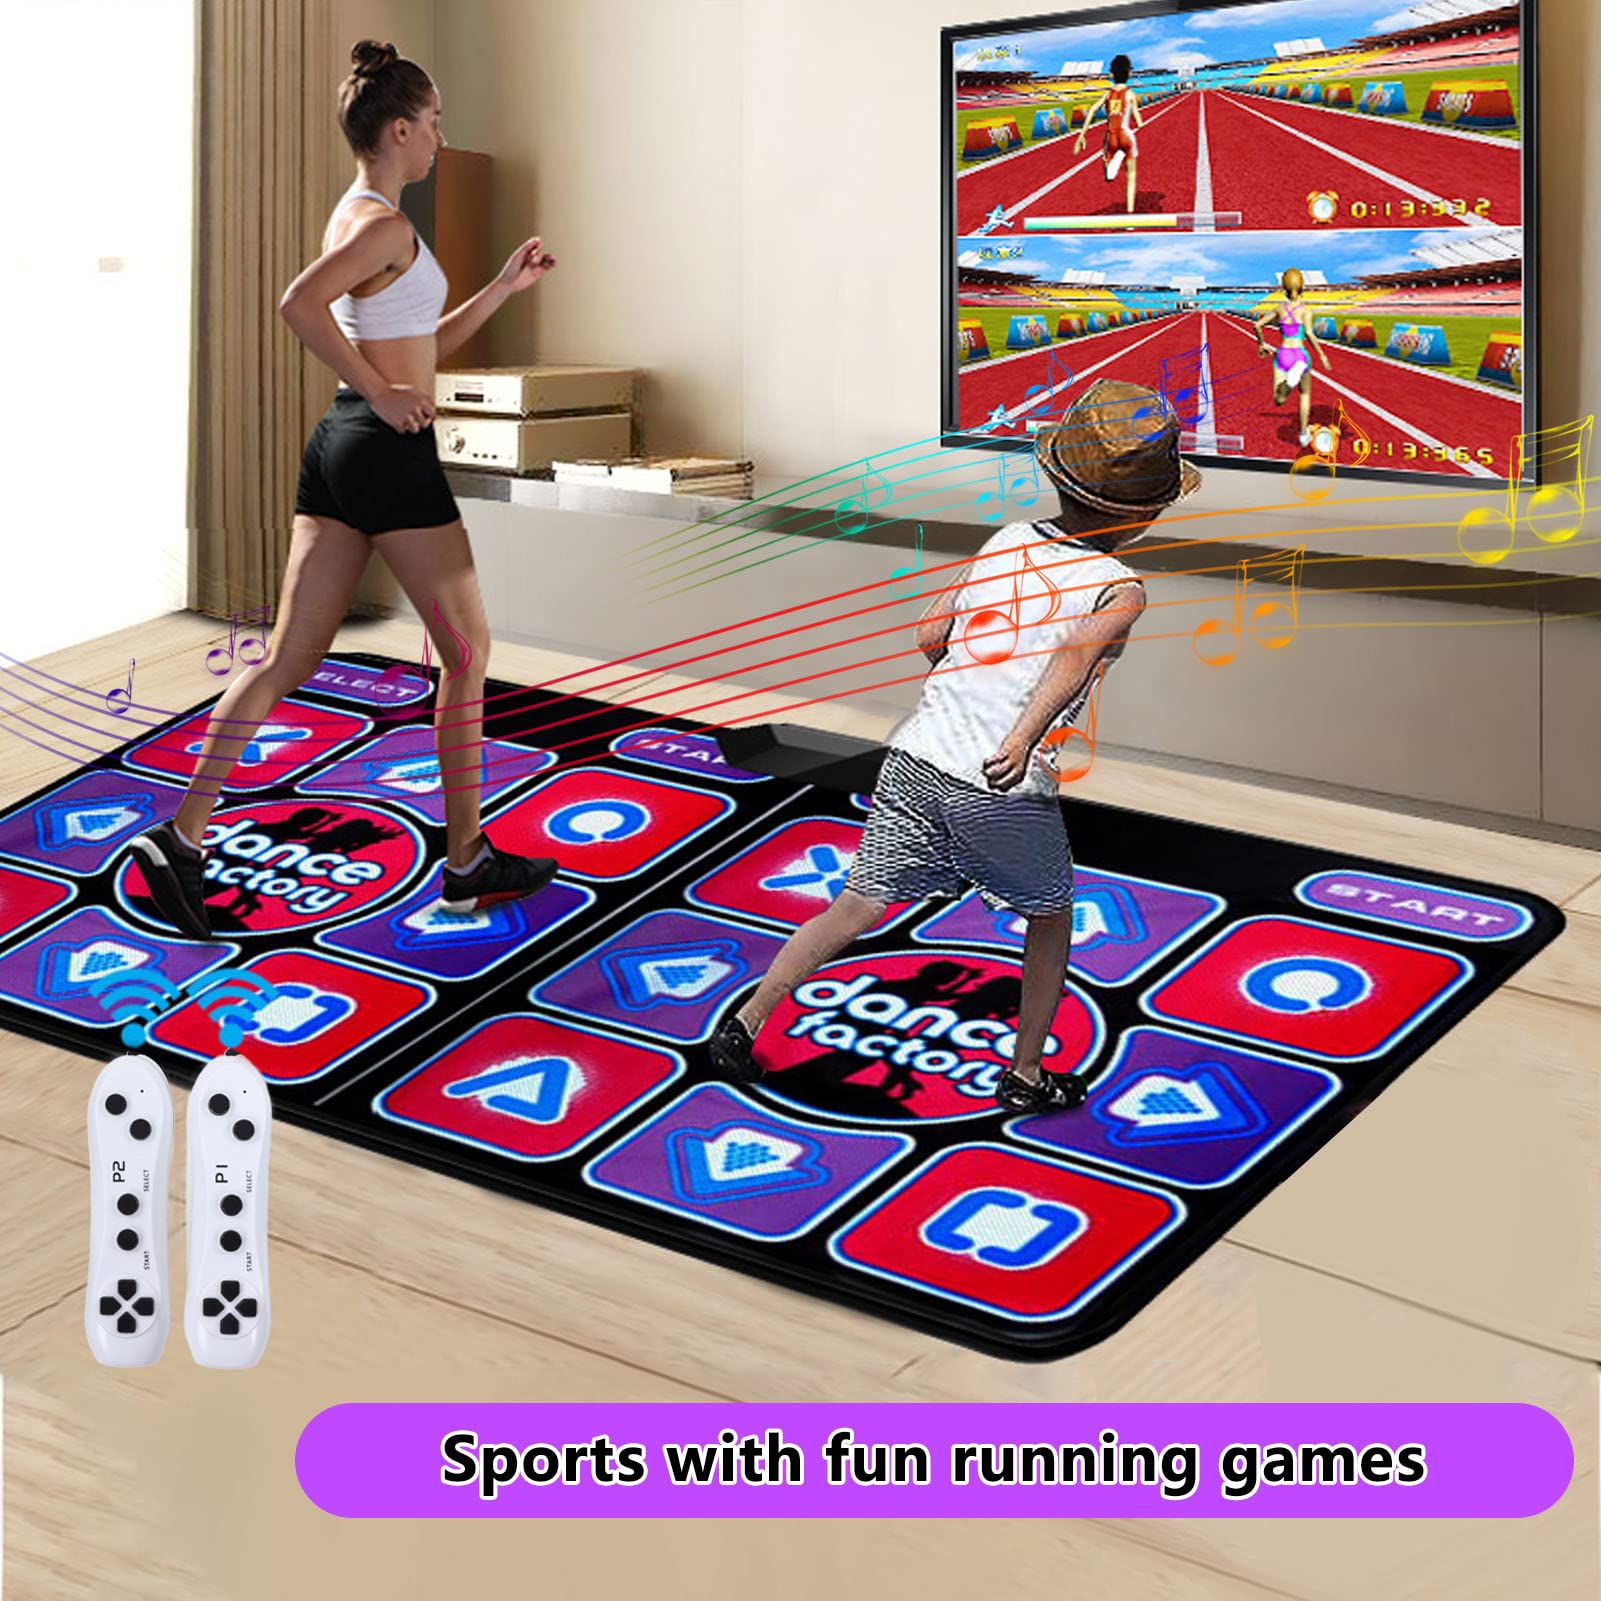 Luqeeg Musical Electronic Dance Mats, Double Player Dance Pad,Foldable Exercise Dance Mat with 2 Remote Controls with AV Cable Exercise Fitness Dance Step Pad Games for TV for Indoor